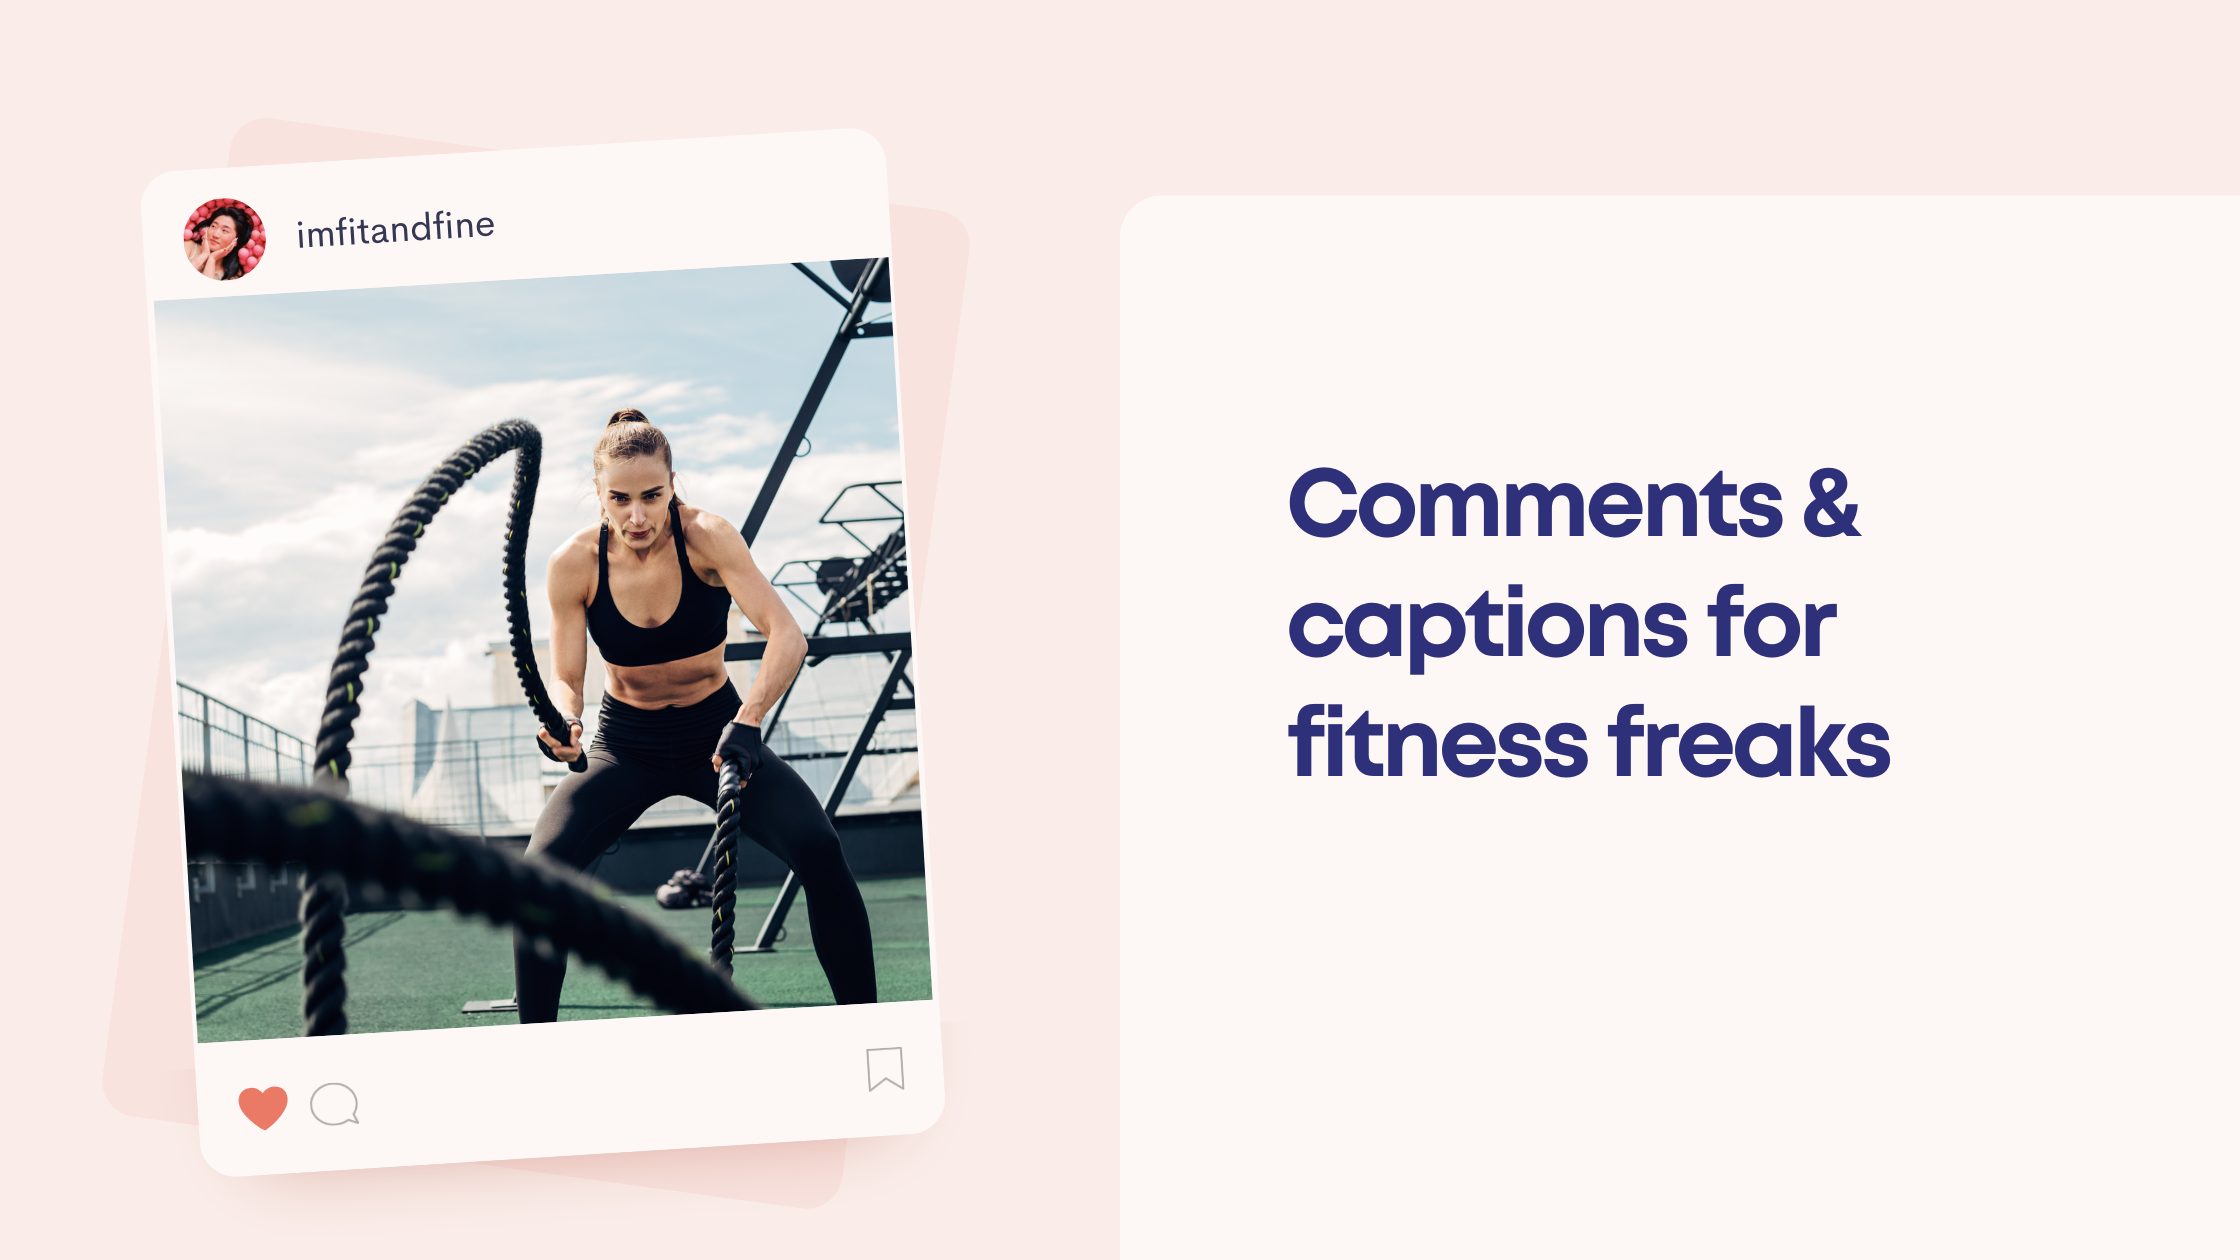 Remote.tools shares comments & captions for fitness freaks